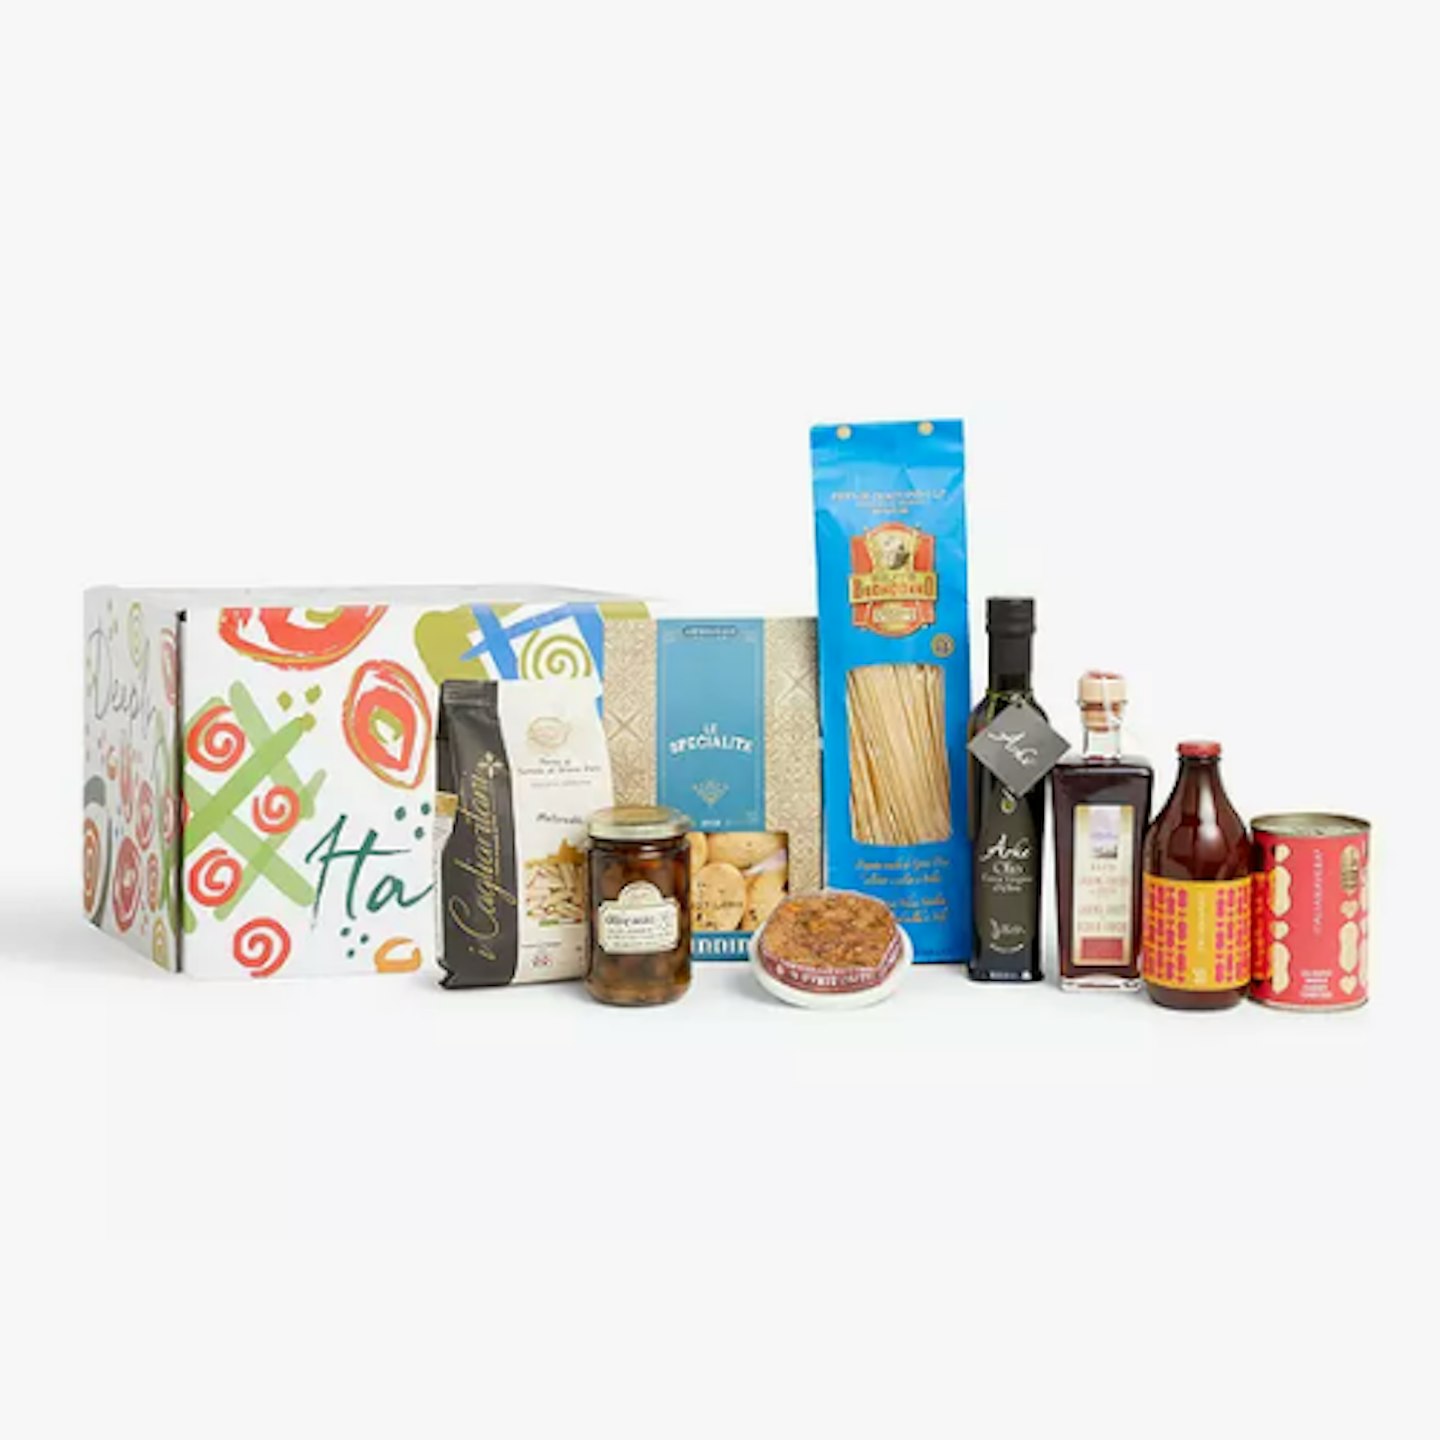 Truly Madly Deeply Italian by Sacla Gourmet Hamper, Small